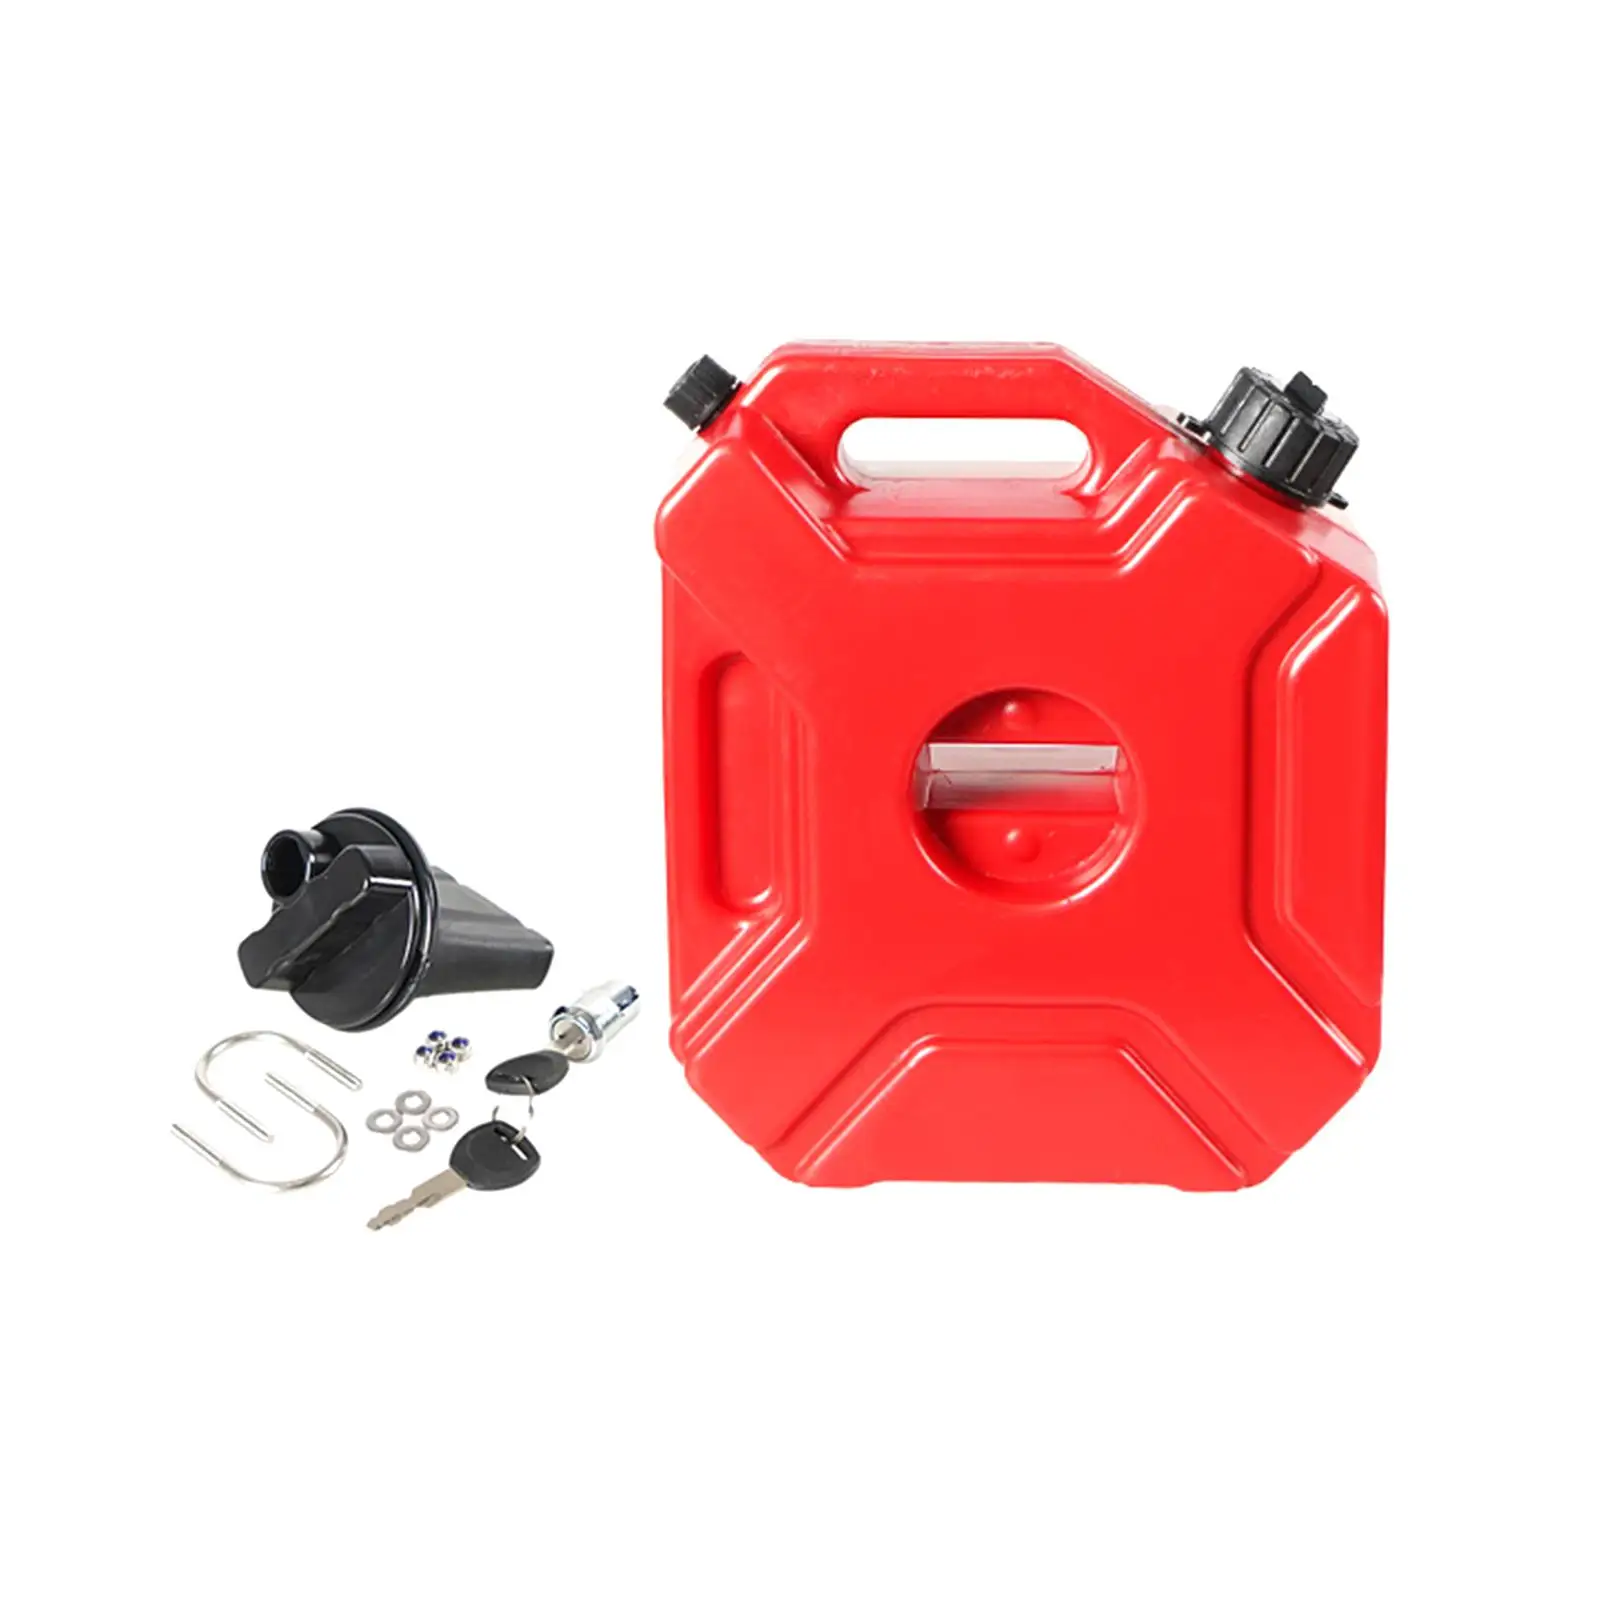 Gas Fuel Petrol Tank 5L with Lock and Keys Plastic Universal Fuel Container for Automotive SUV Moto Spare Parts Replacement